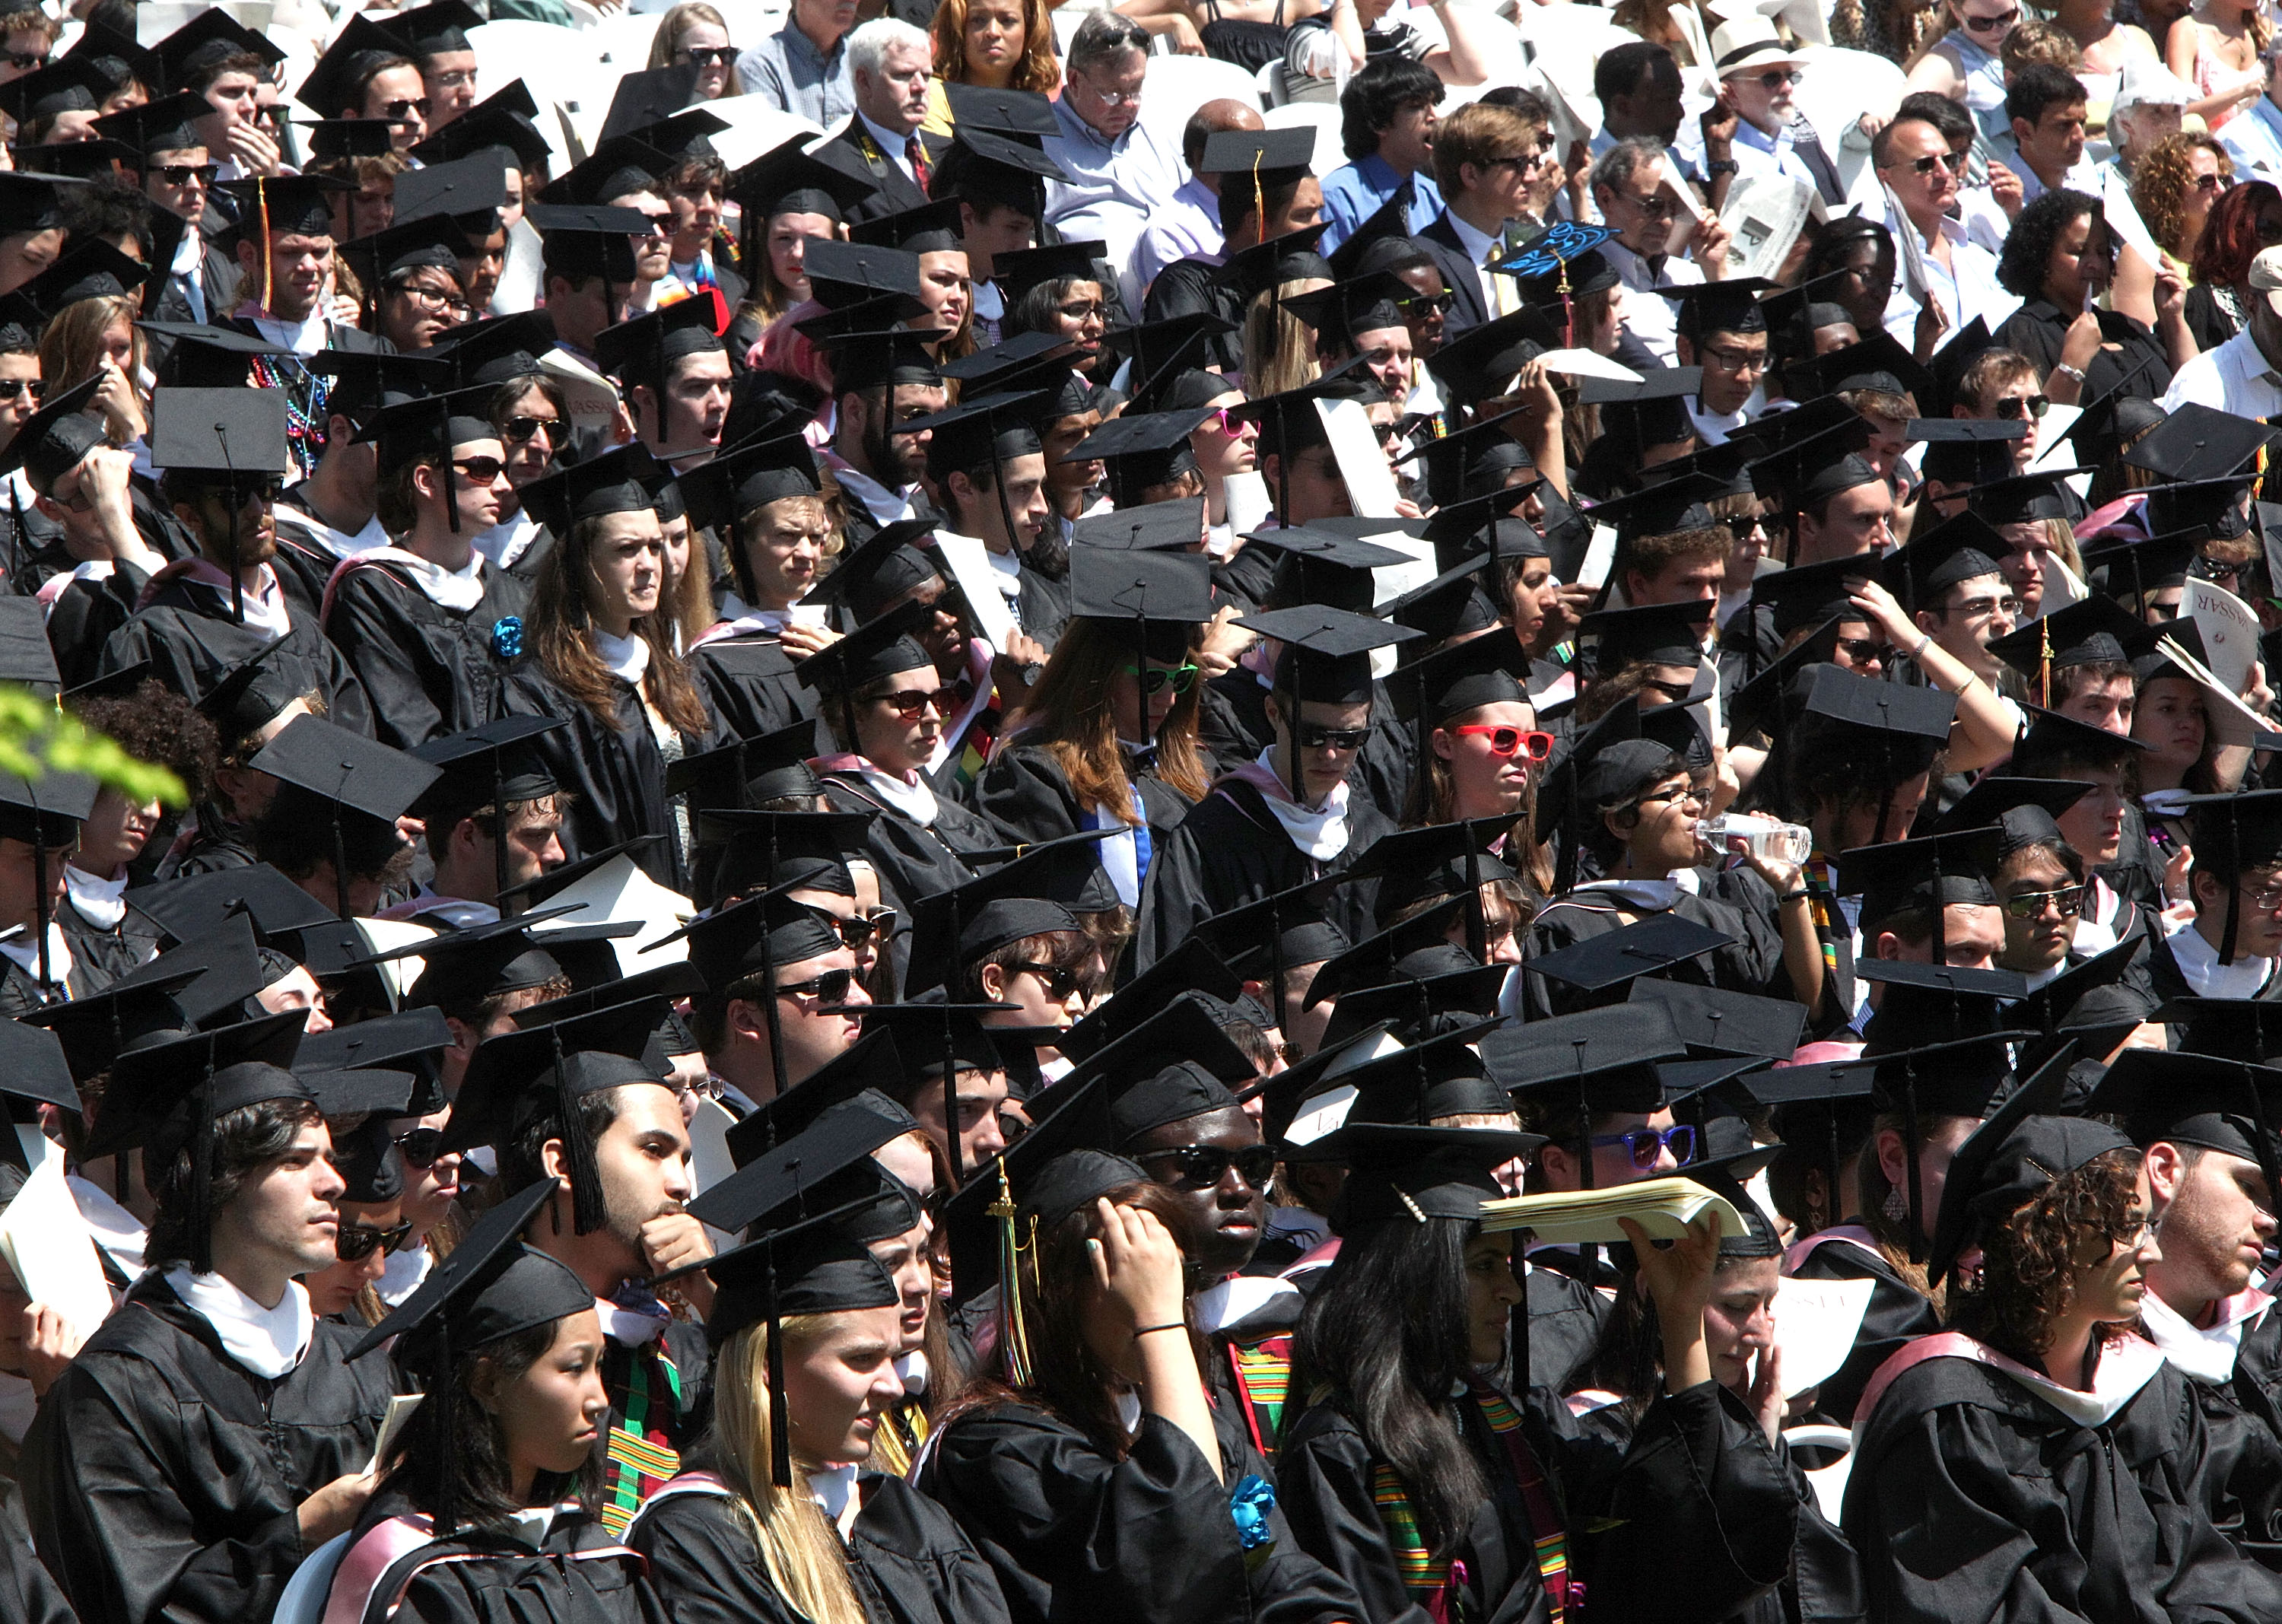 By the end of this decade analysts project almost two-thirds of workers will been a credential past a high school diploma.
         The Obama administration is part of a national push for changes to higher education officials hope could produce more college
         graduates more efficiently. Photo of 2012 Vassar College commencement by Paul Zimmerman/Getty Images.